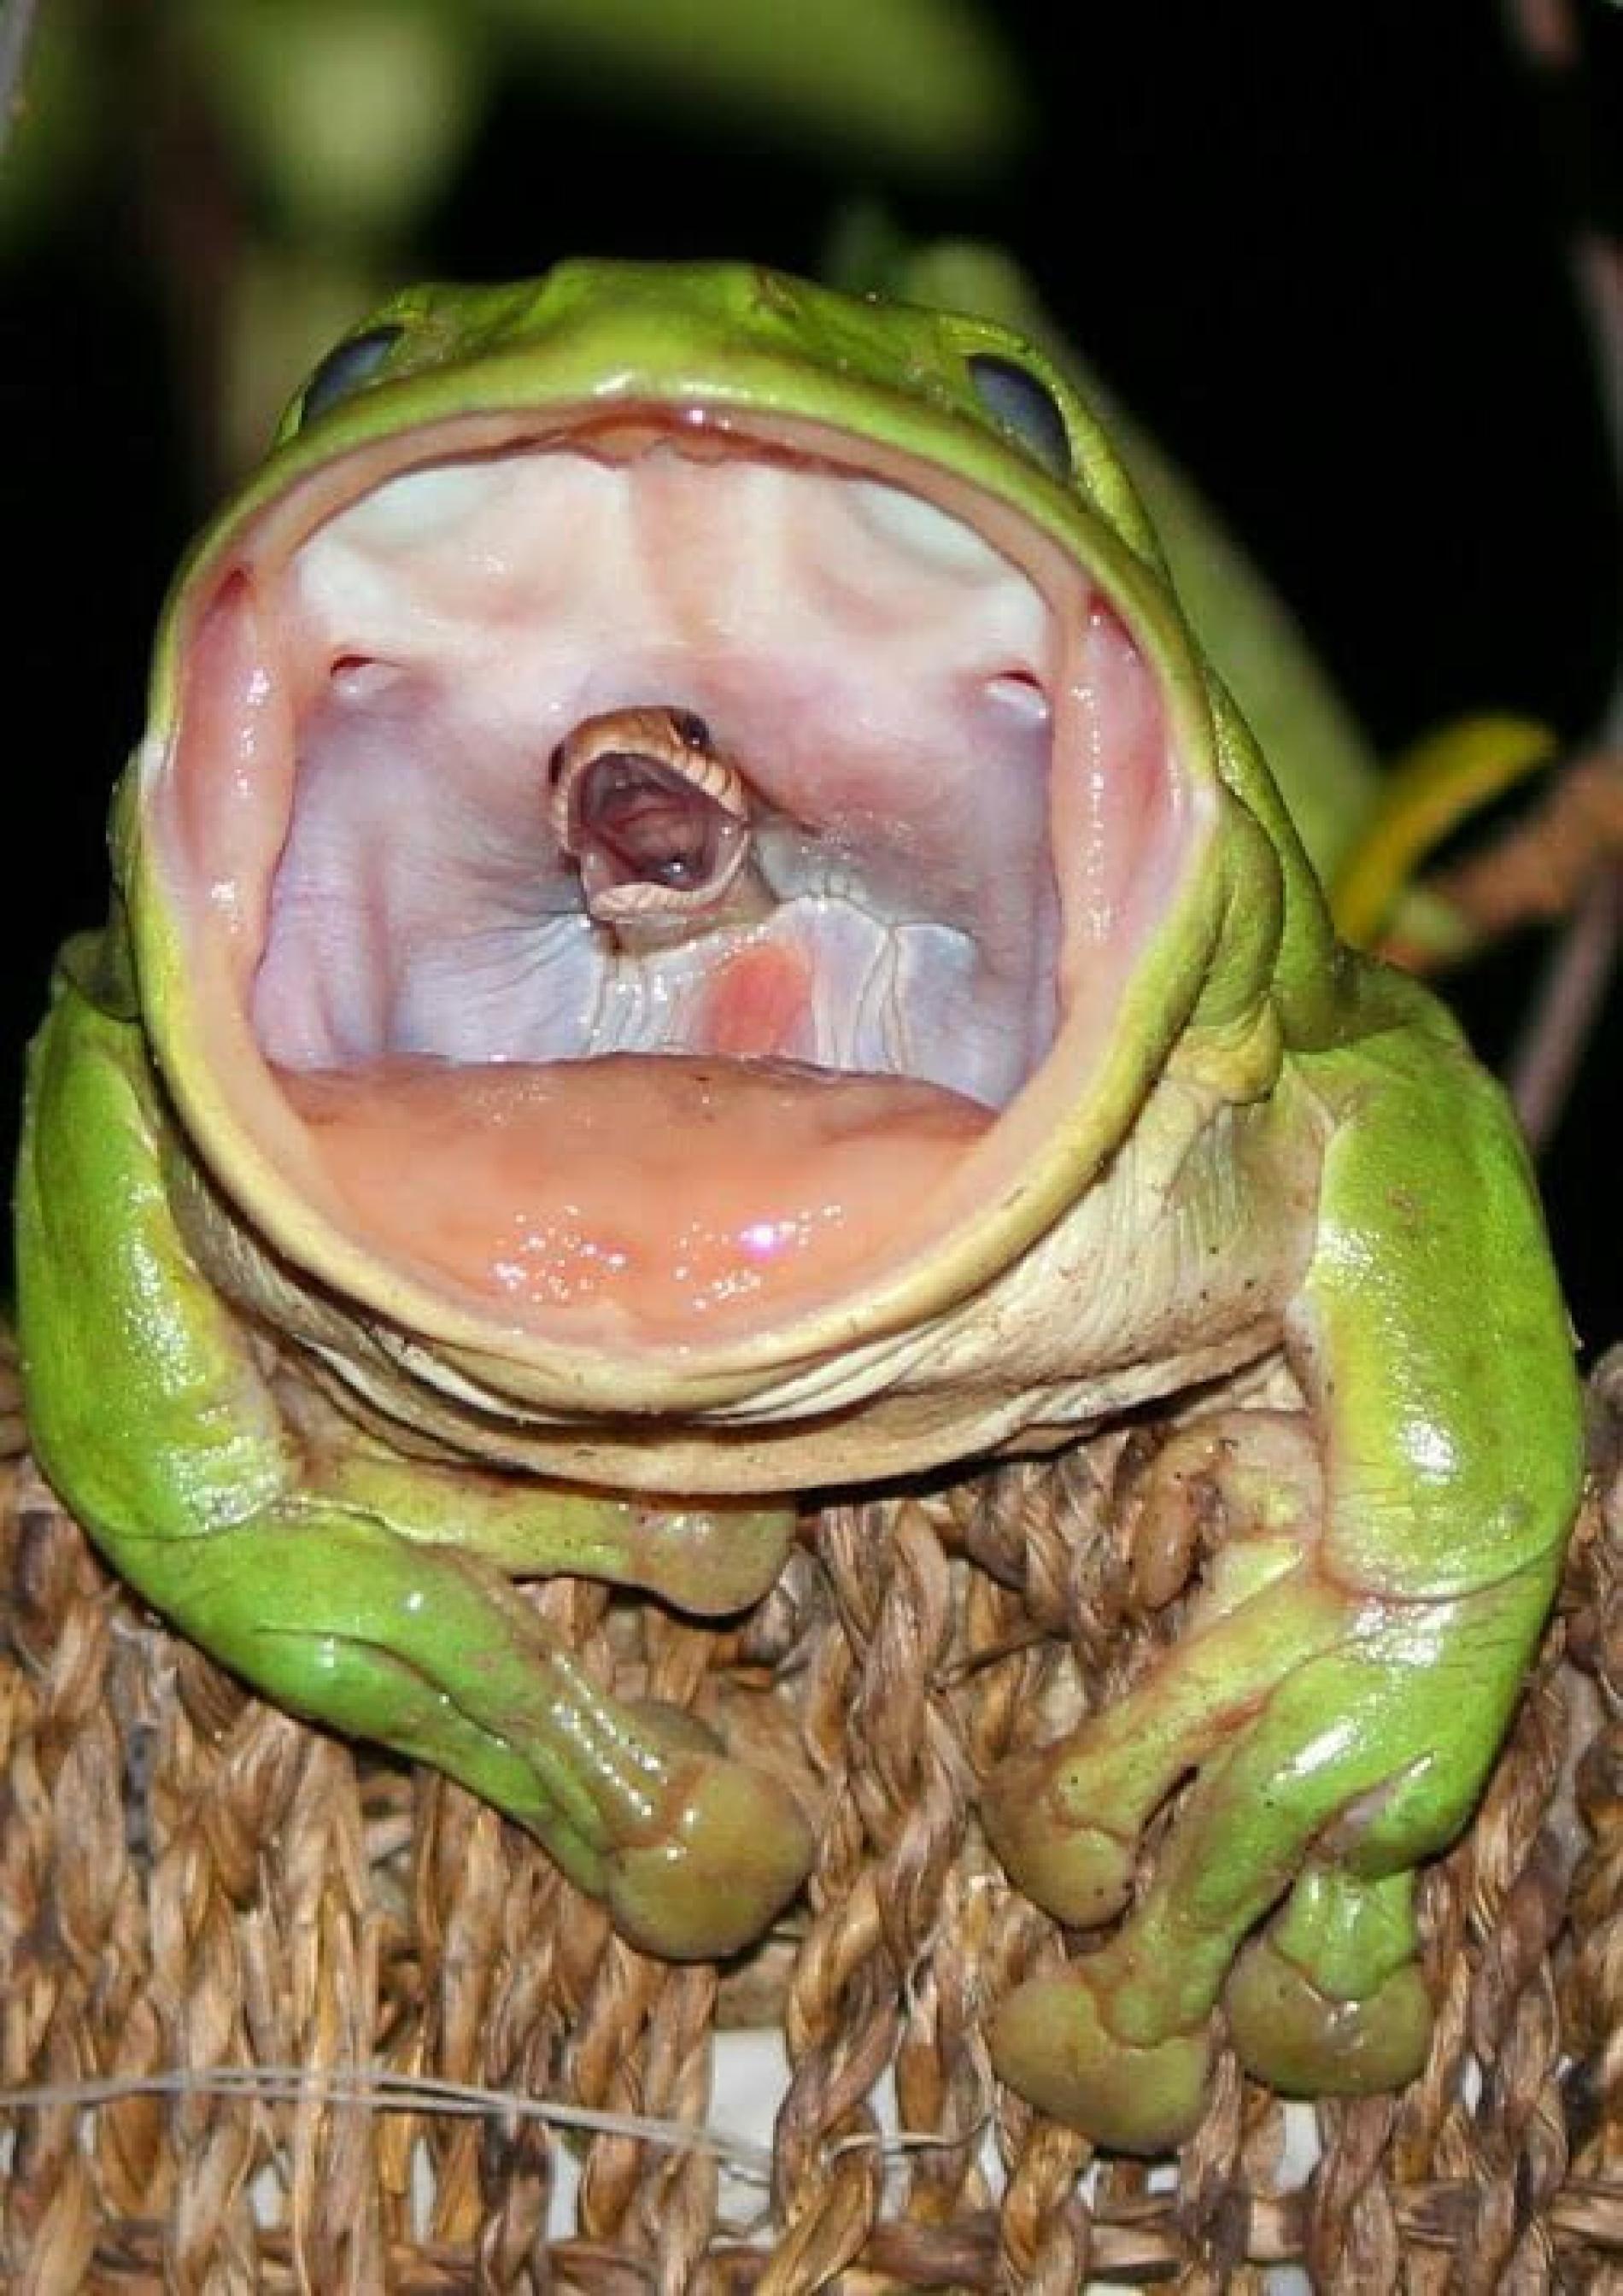 Incredible Photo Catches the Moment a Frog Swallows a Snake